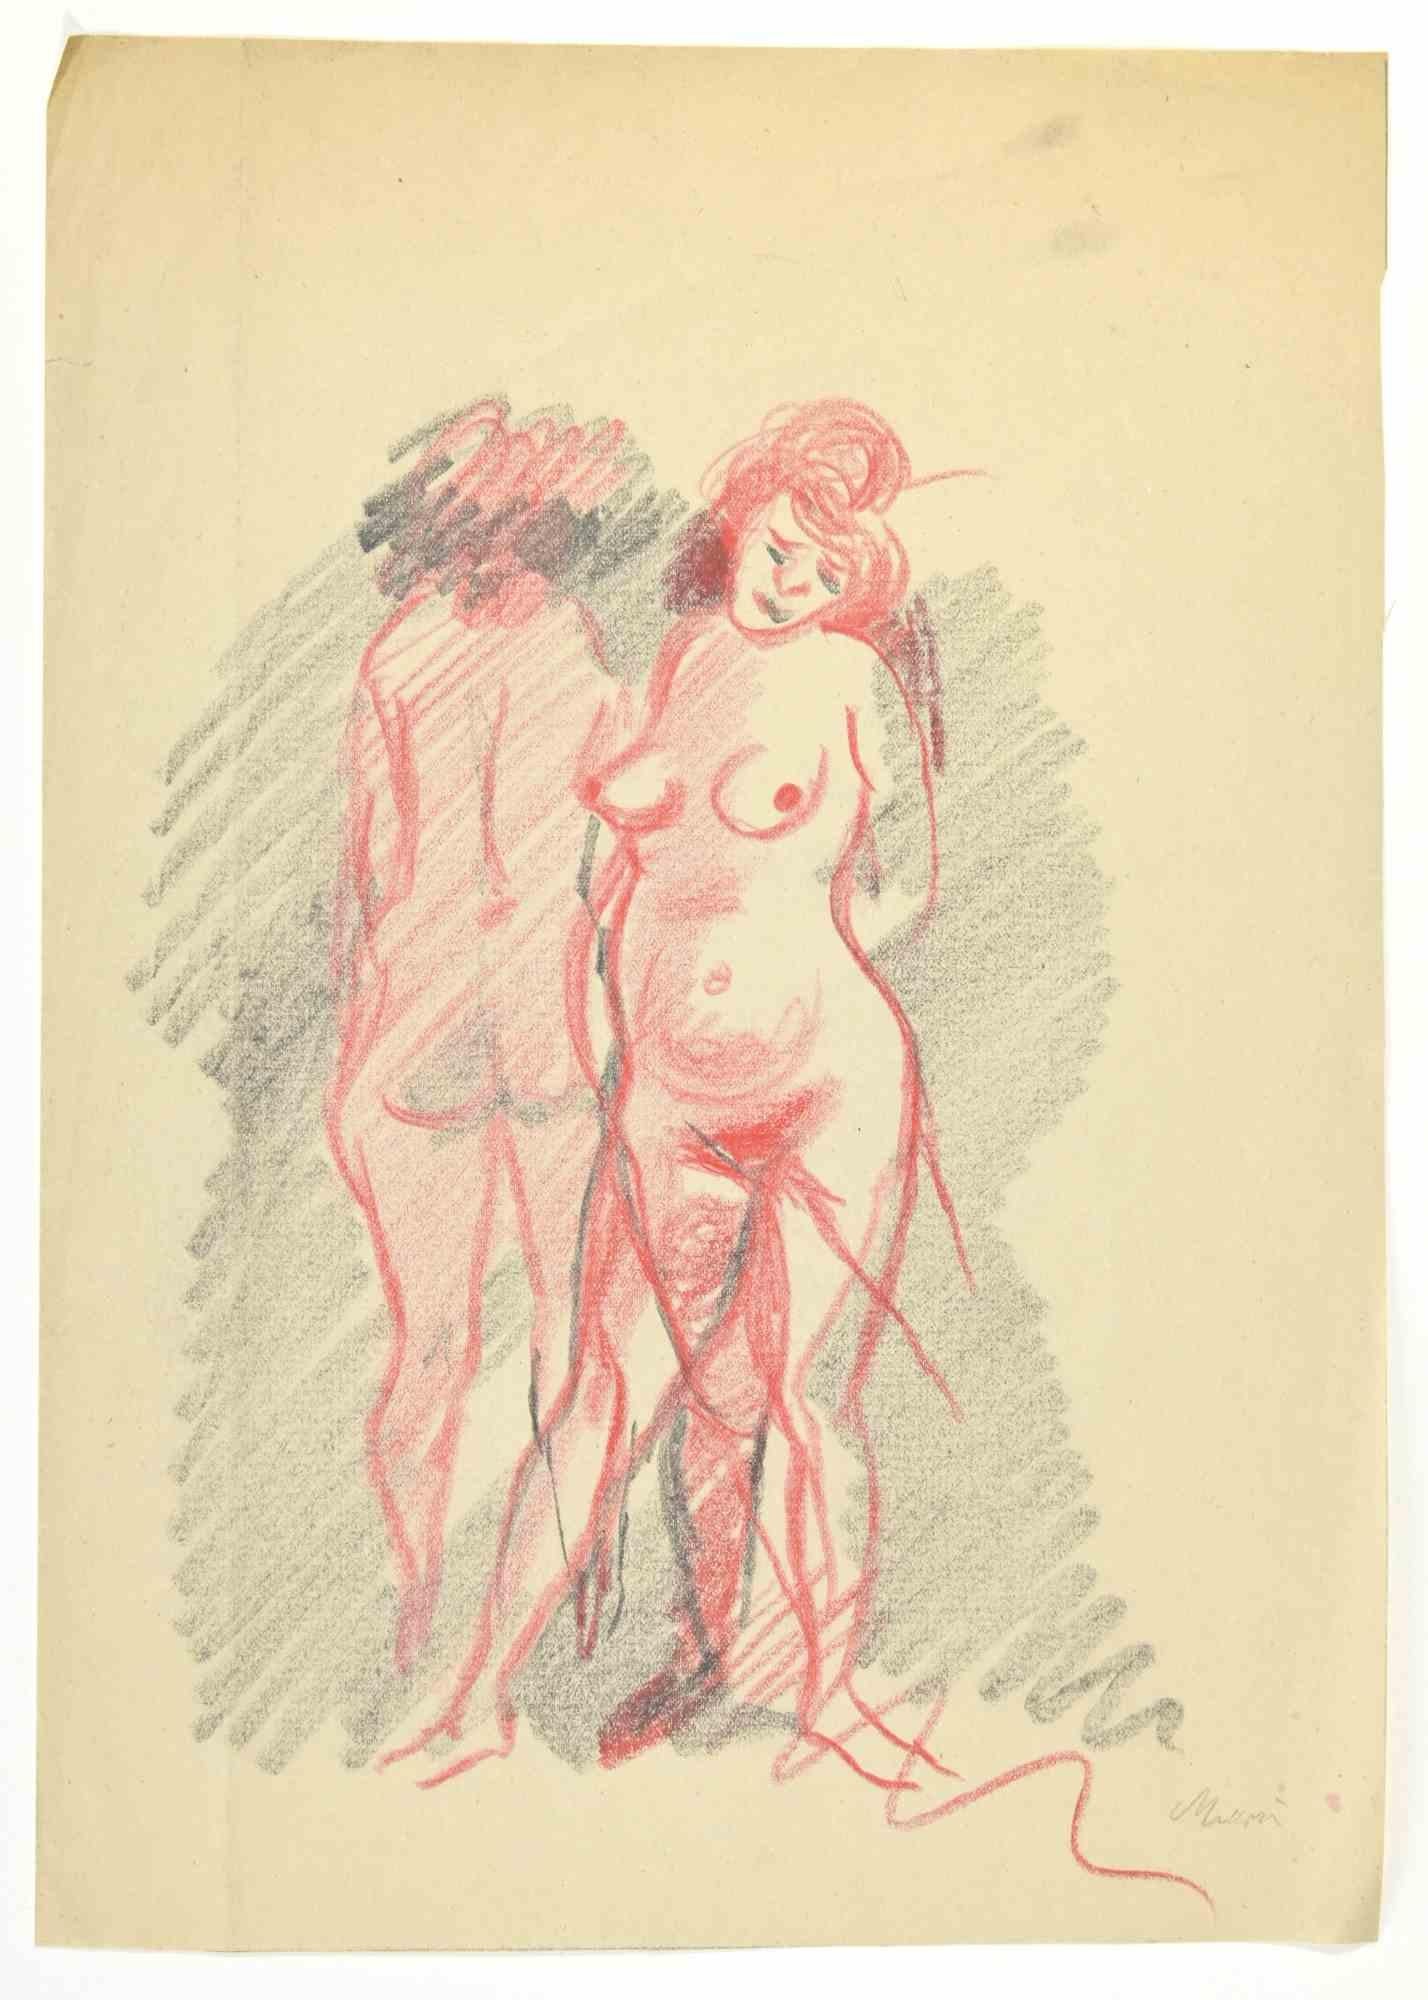 Nudes Women is a Pencil and Pastel Drawing realized by Mino Maccari  (1924-1989) in  1925 ca.

Hand-signed on the lower.

Good condition with folding and aged margins.

Mino Maccari (Siena, 1924-Rome, June 16, 1989) was an Italian writer, painter,